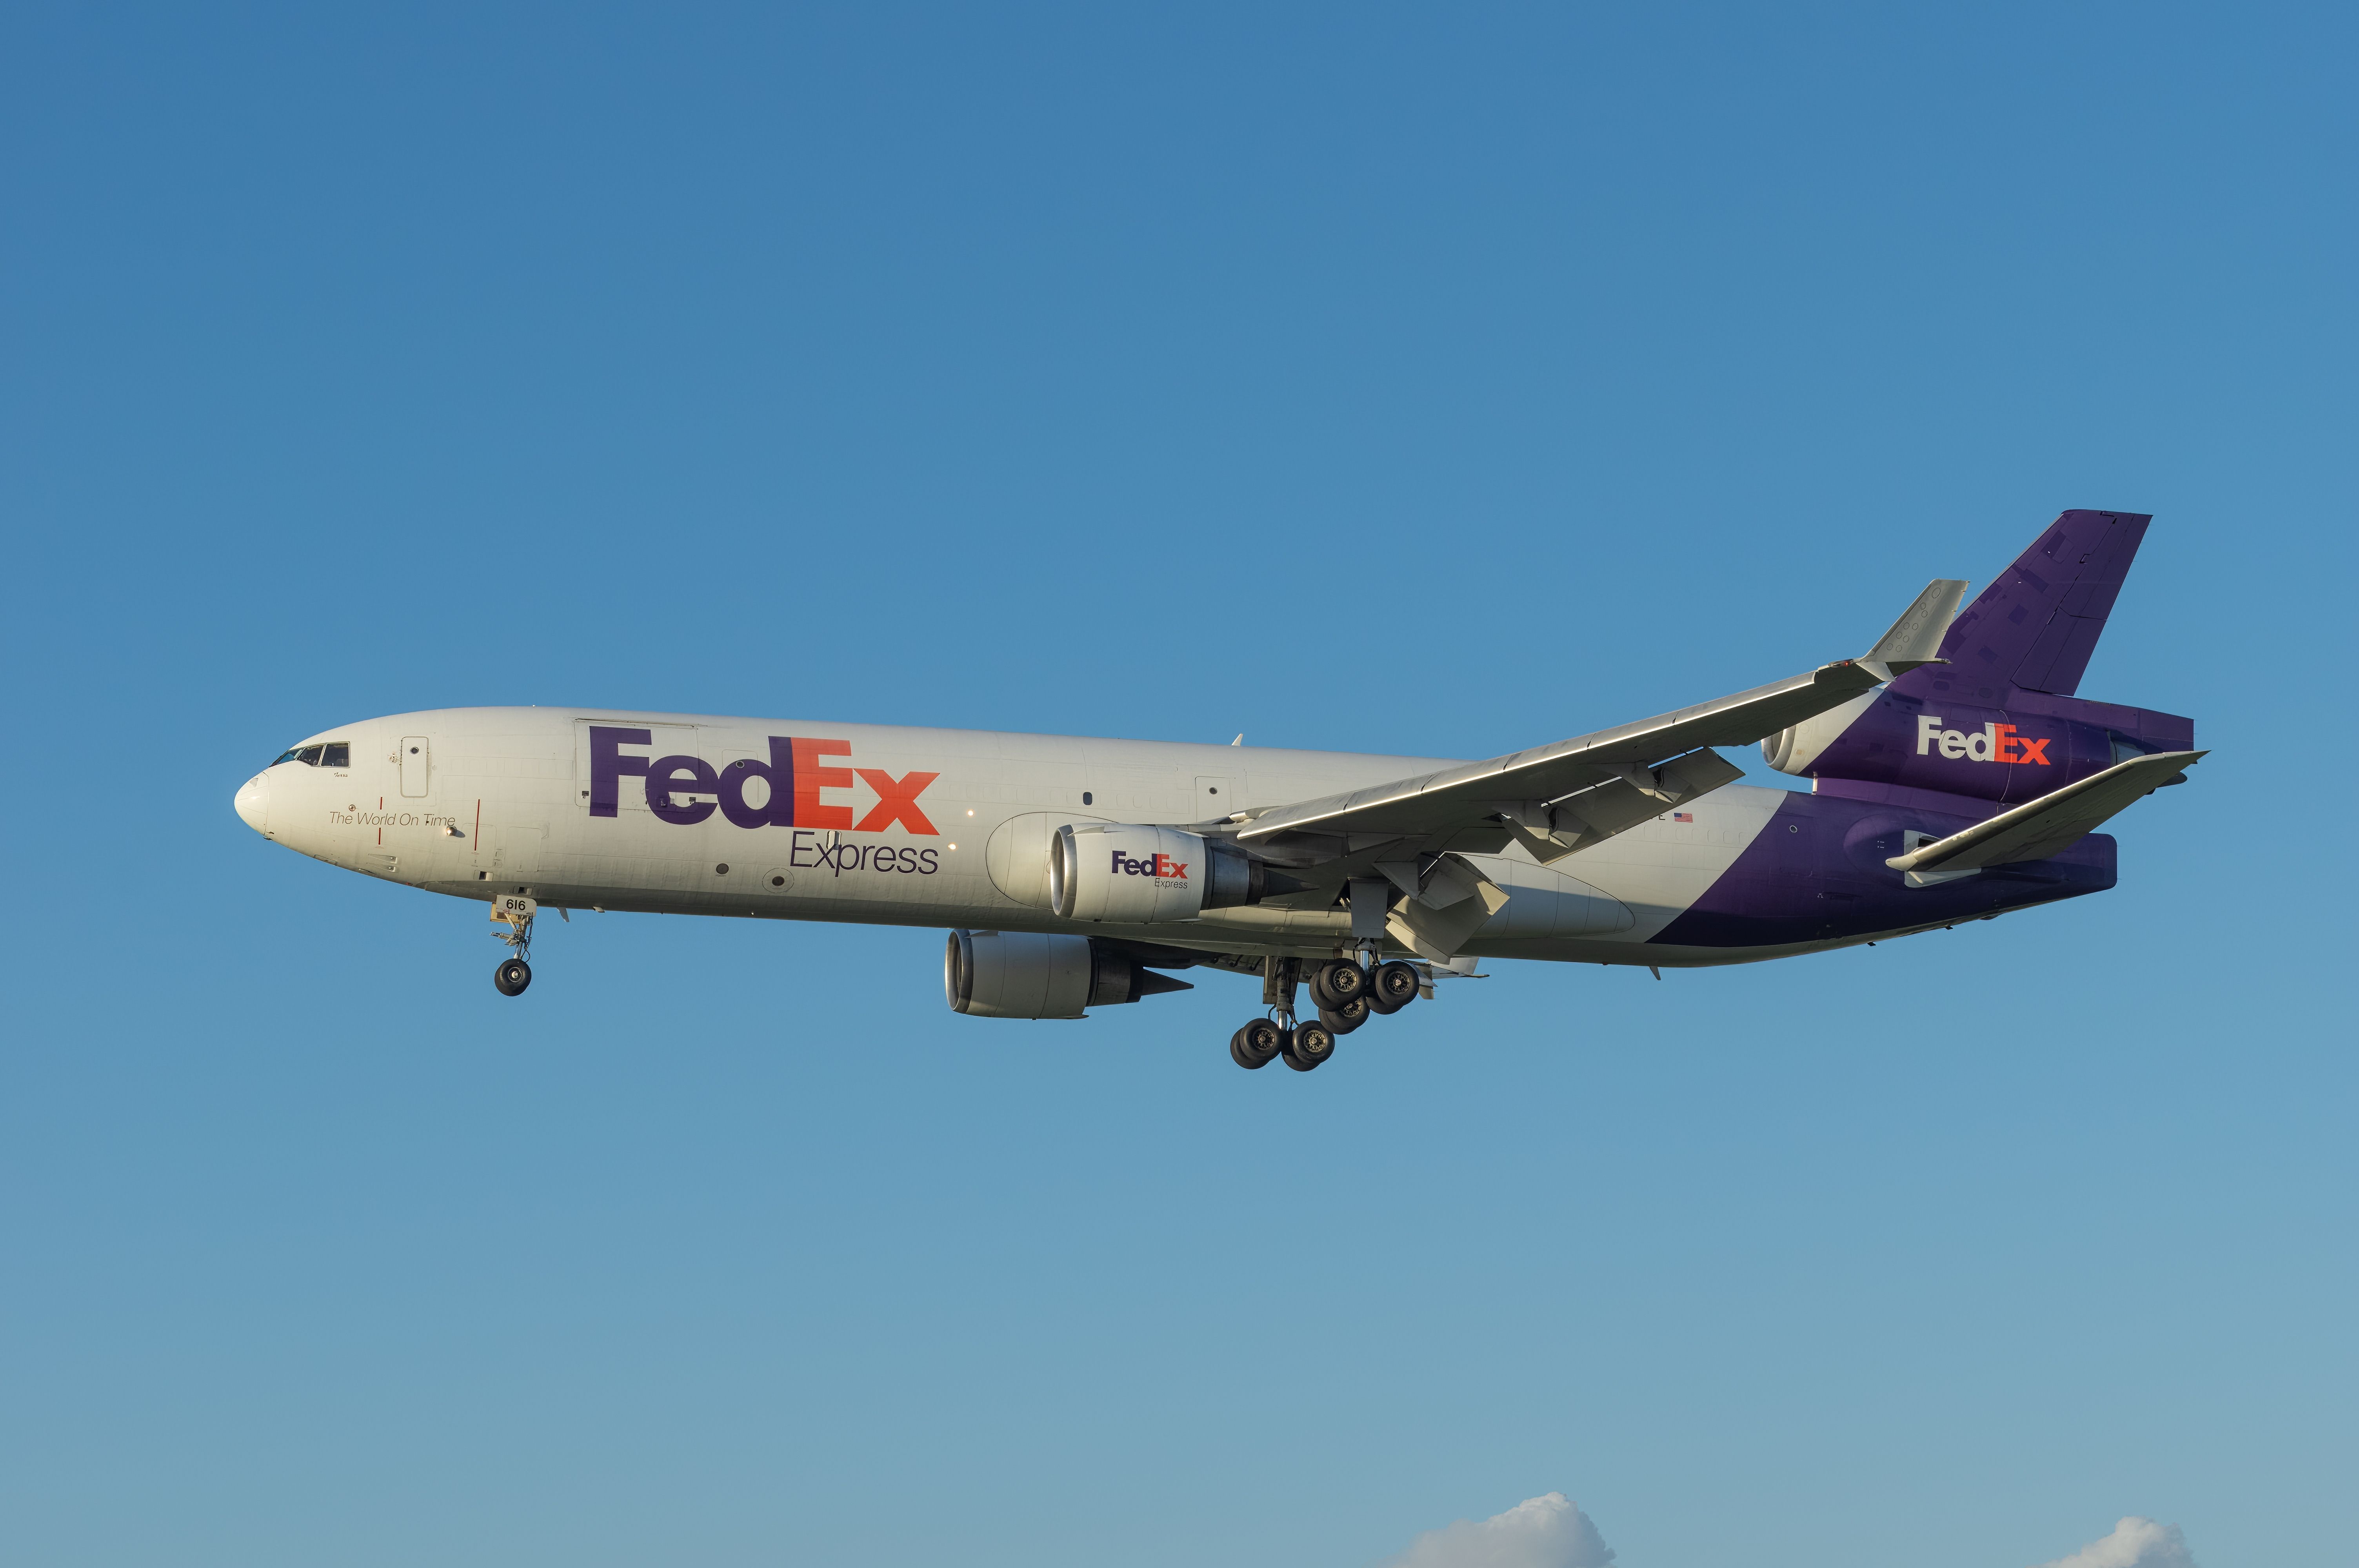 Los Angeles, California, United States - February 5, 2023: FedEx Express 1995 McDonnell Douglas MD-11 aircraft with registration N616FE shown approaching LAX, Los Angeles International Airport.